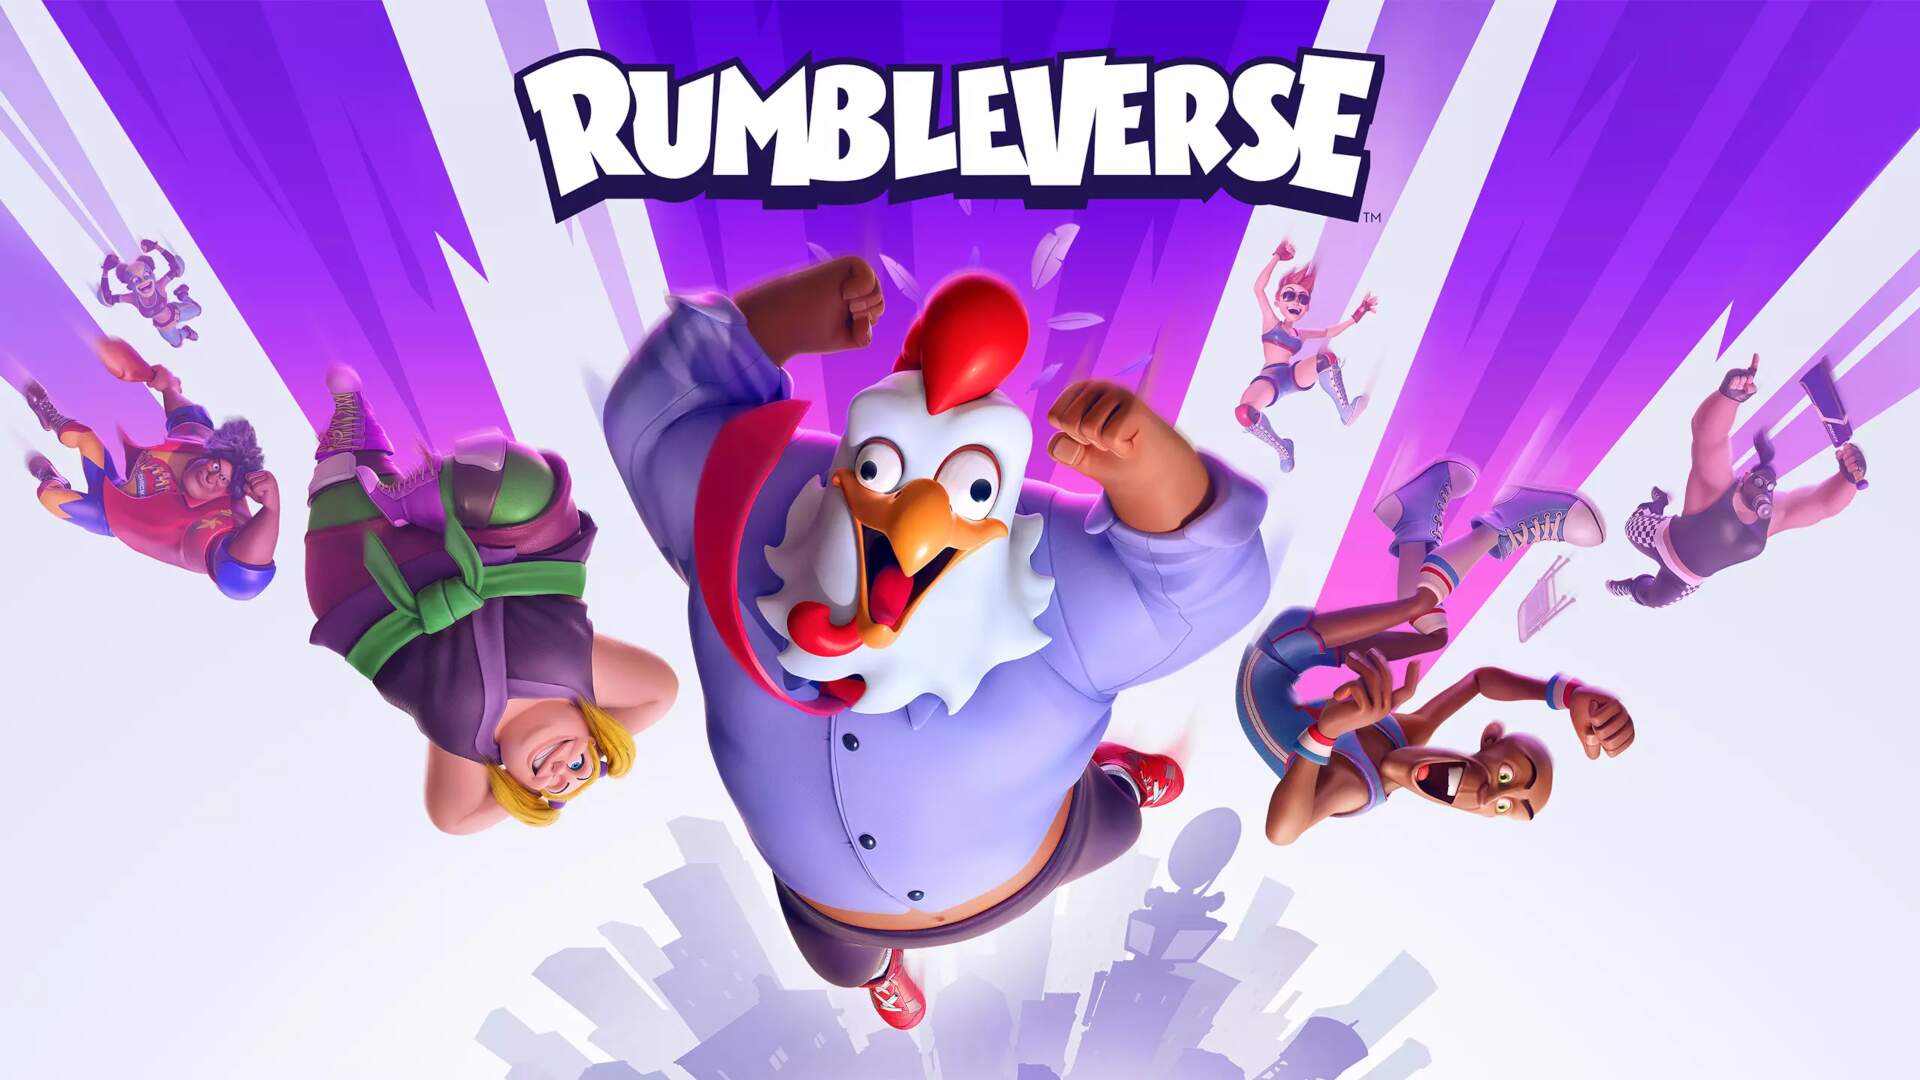 Rubleverse shutting down in February, Rumbleverse